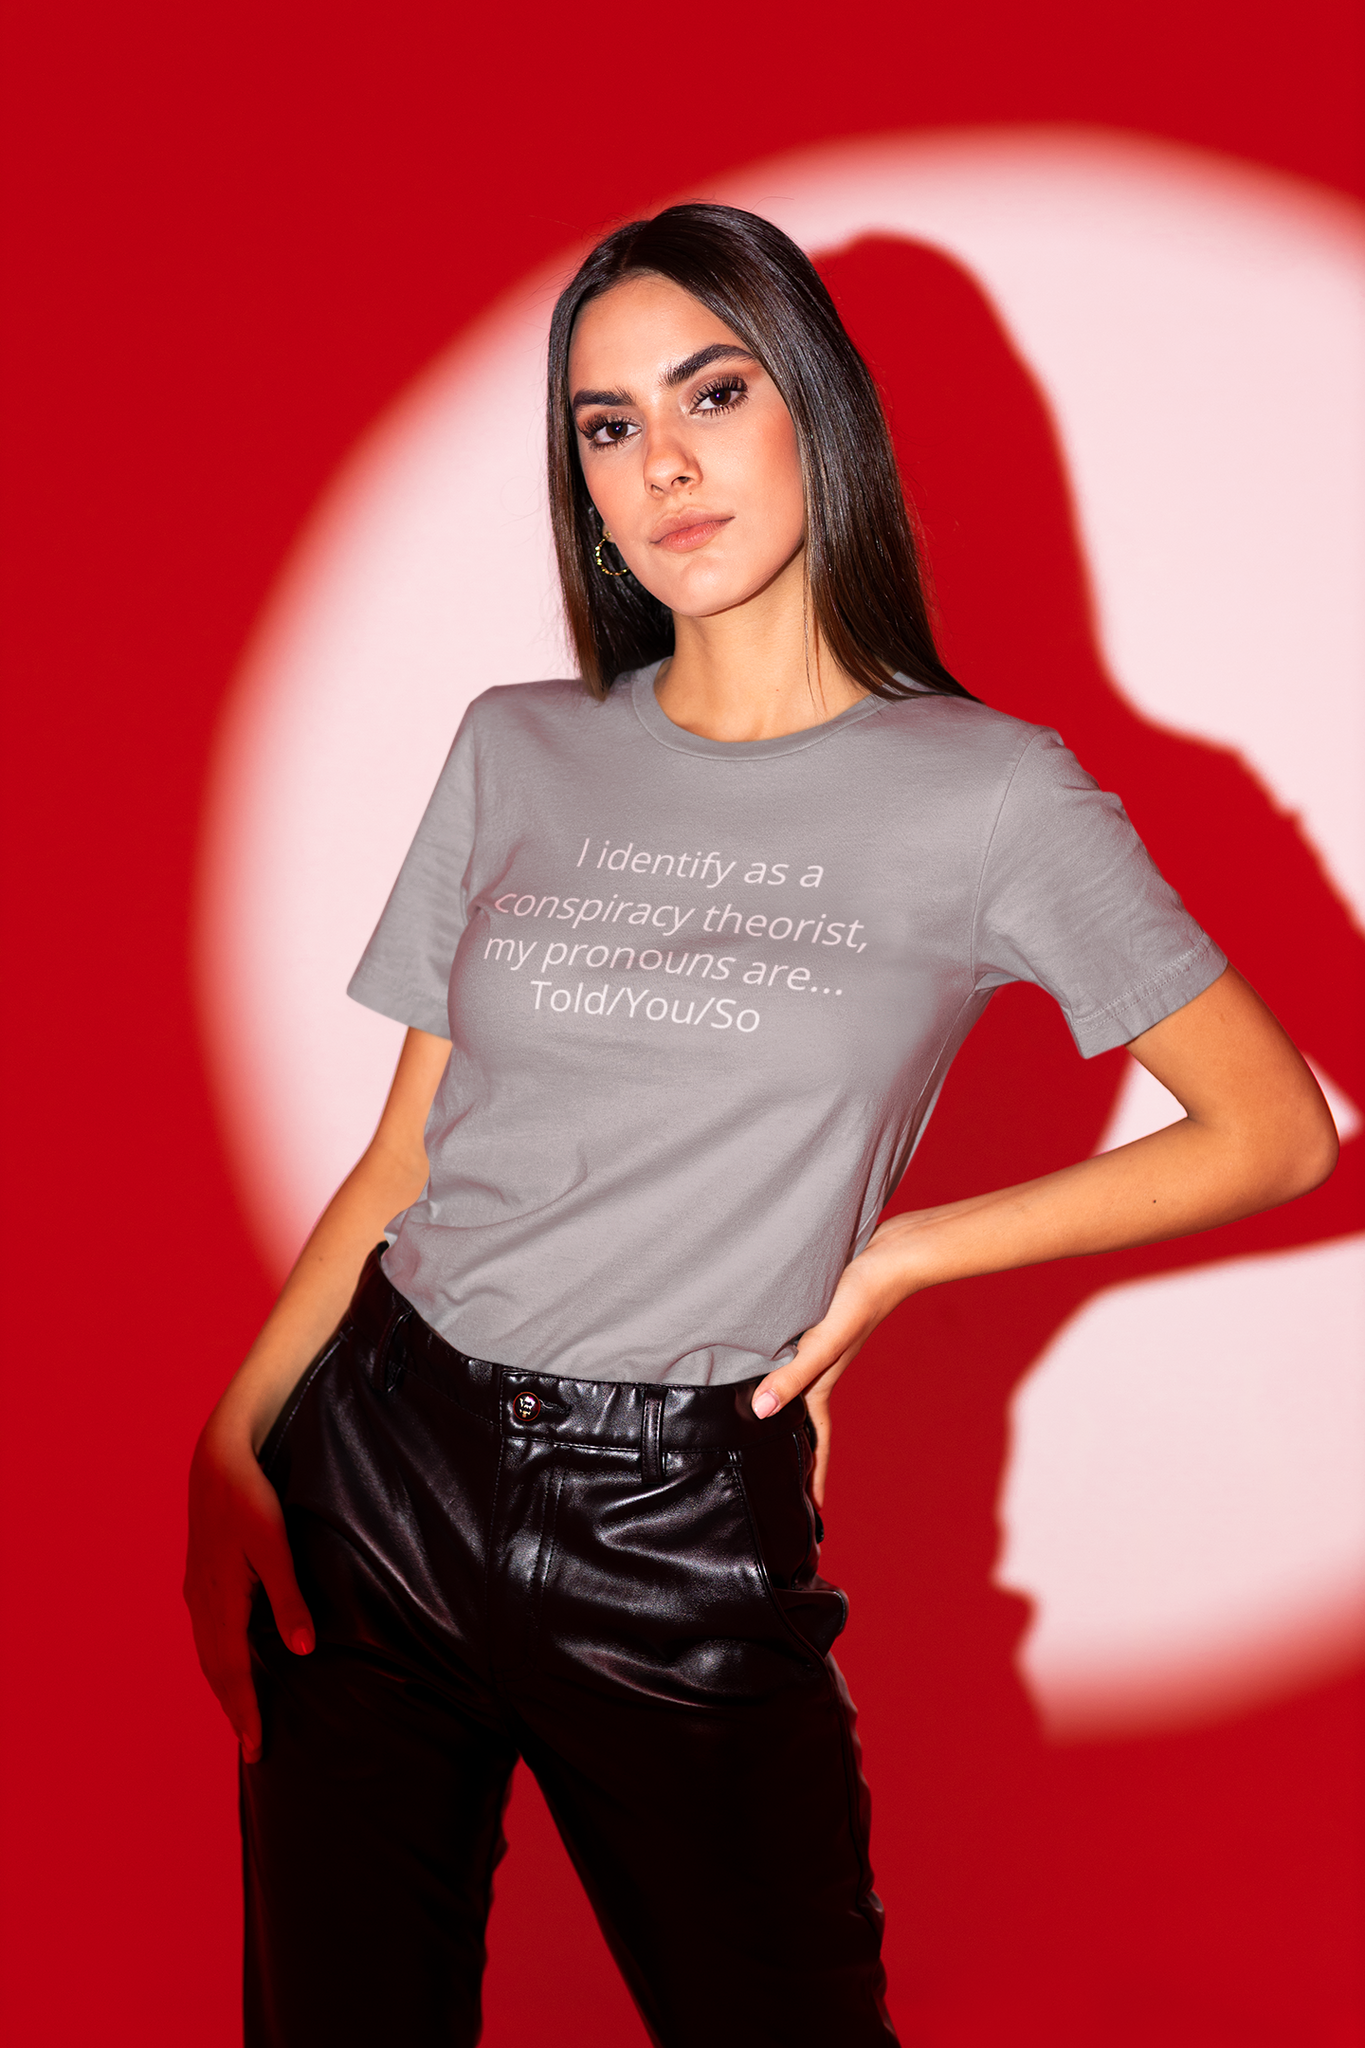 I Identify As A Conspiracy Theorist, My Pronouns are...Told/You/So - T-Shirt Dam/Women Ladyfit